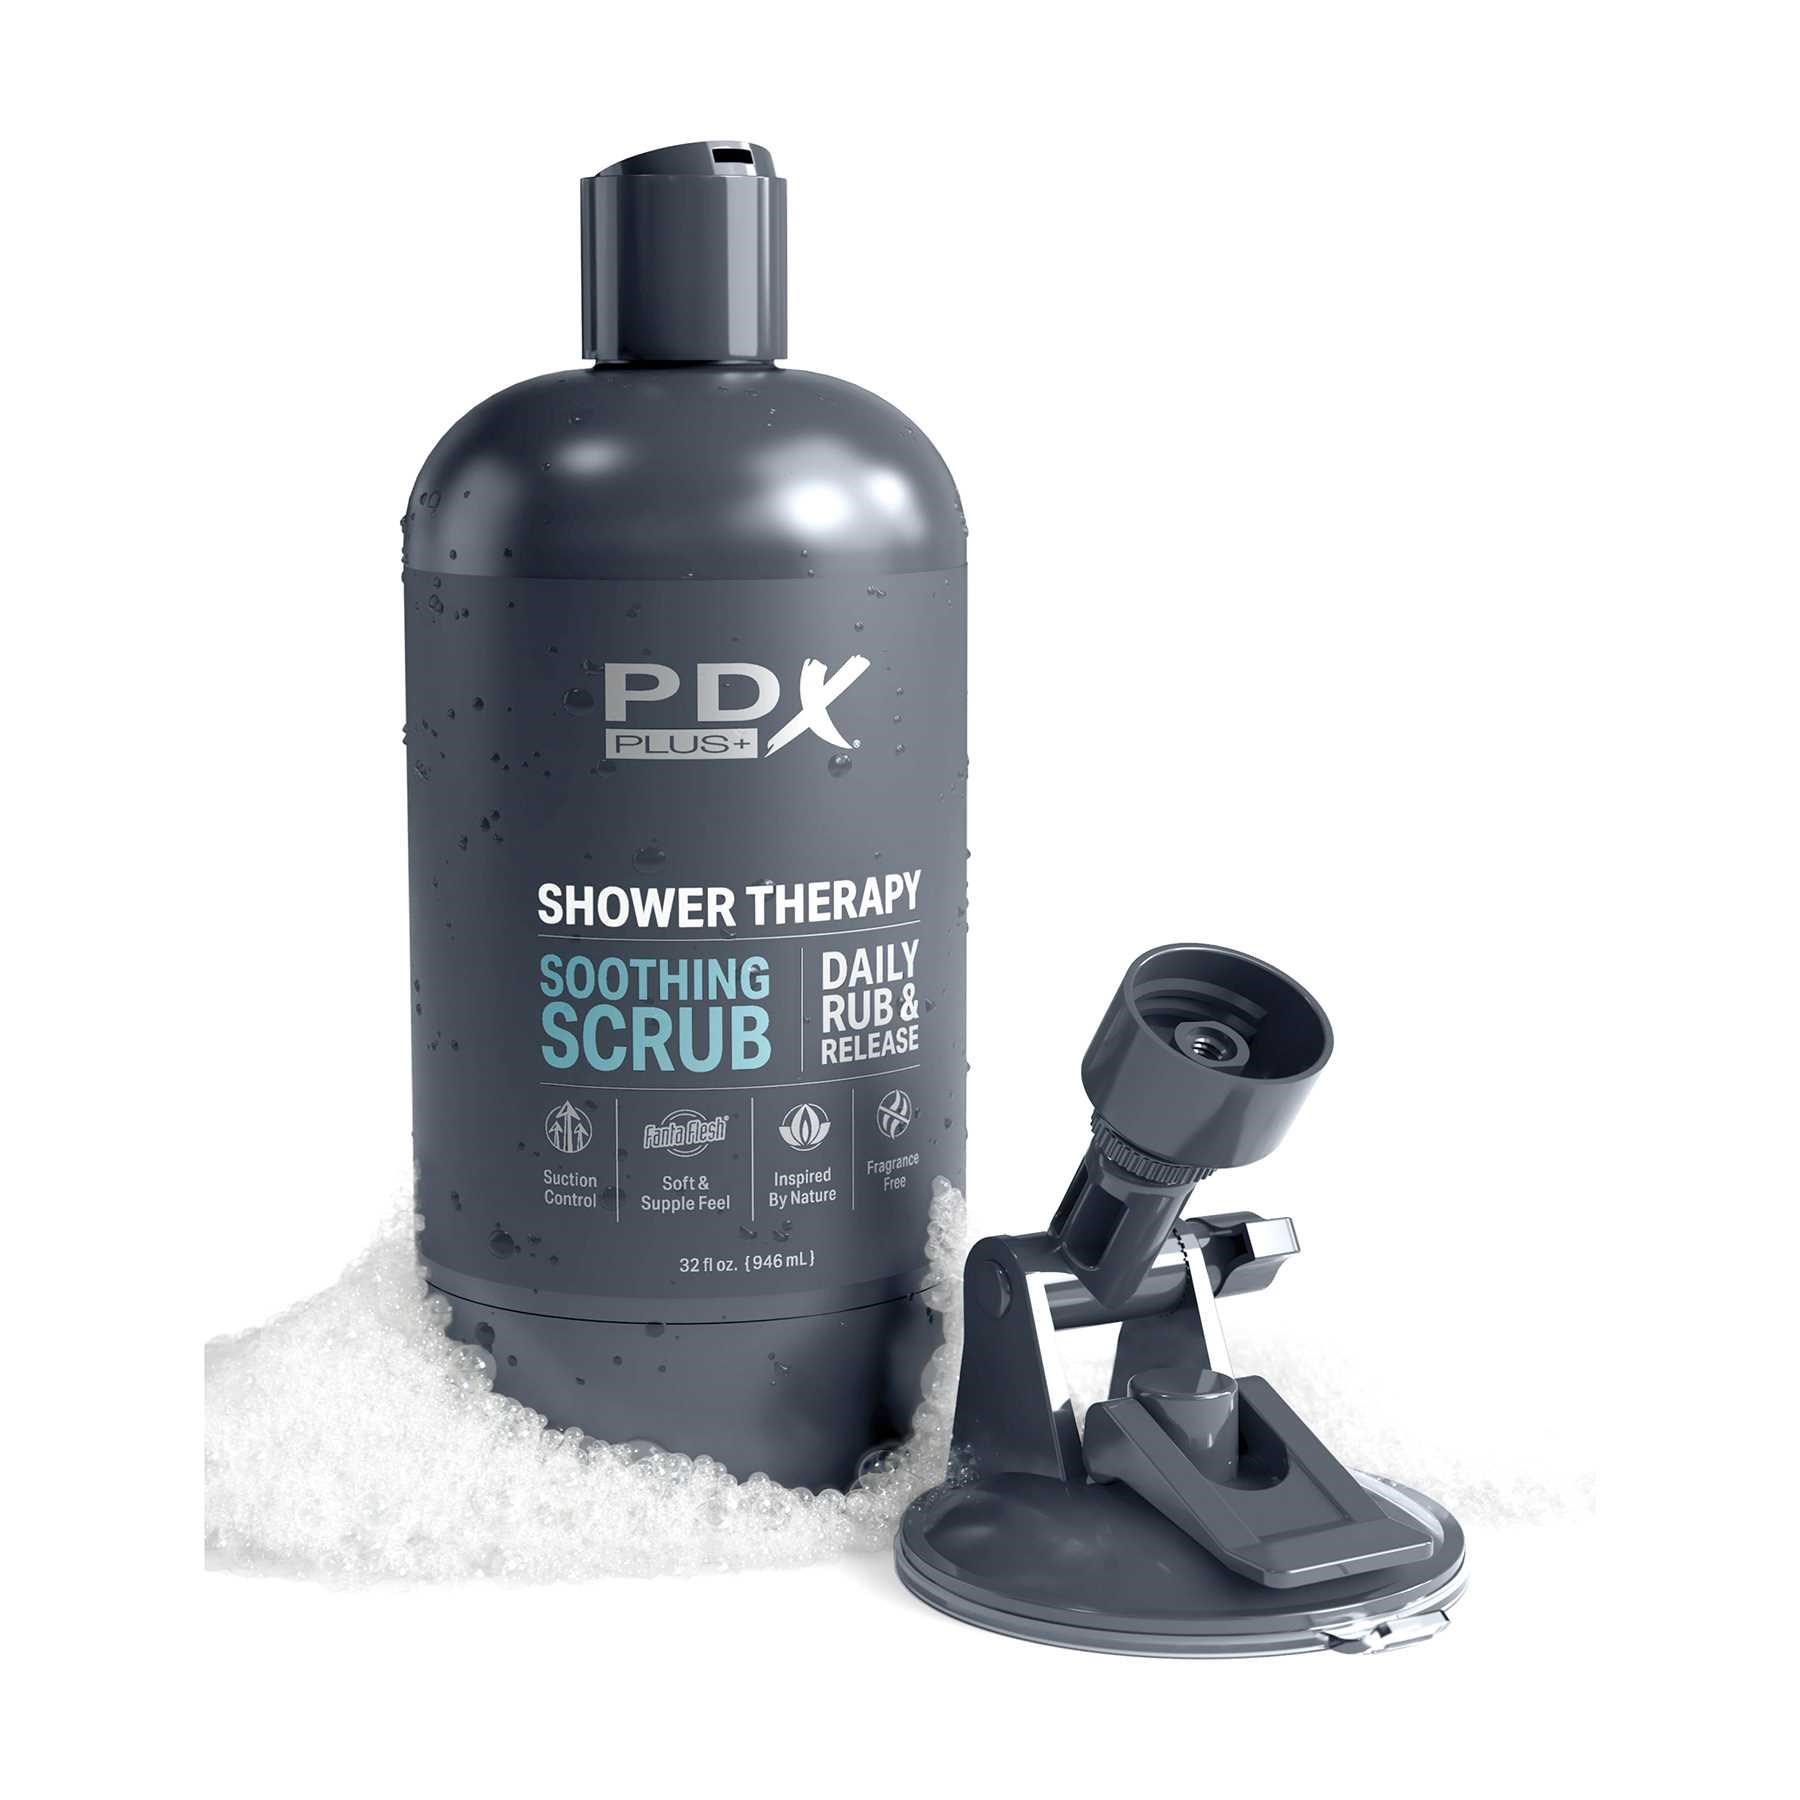 PDX Plus Shower Therapy Soothing Scrub Discreet Stroker white next to mount